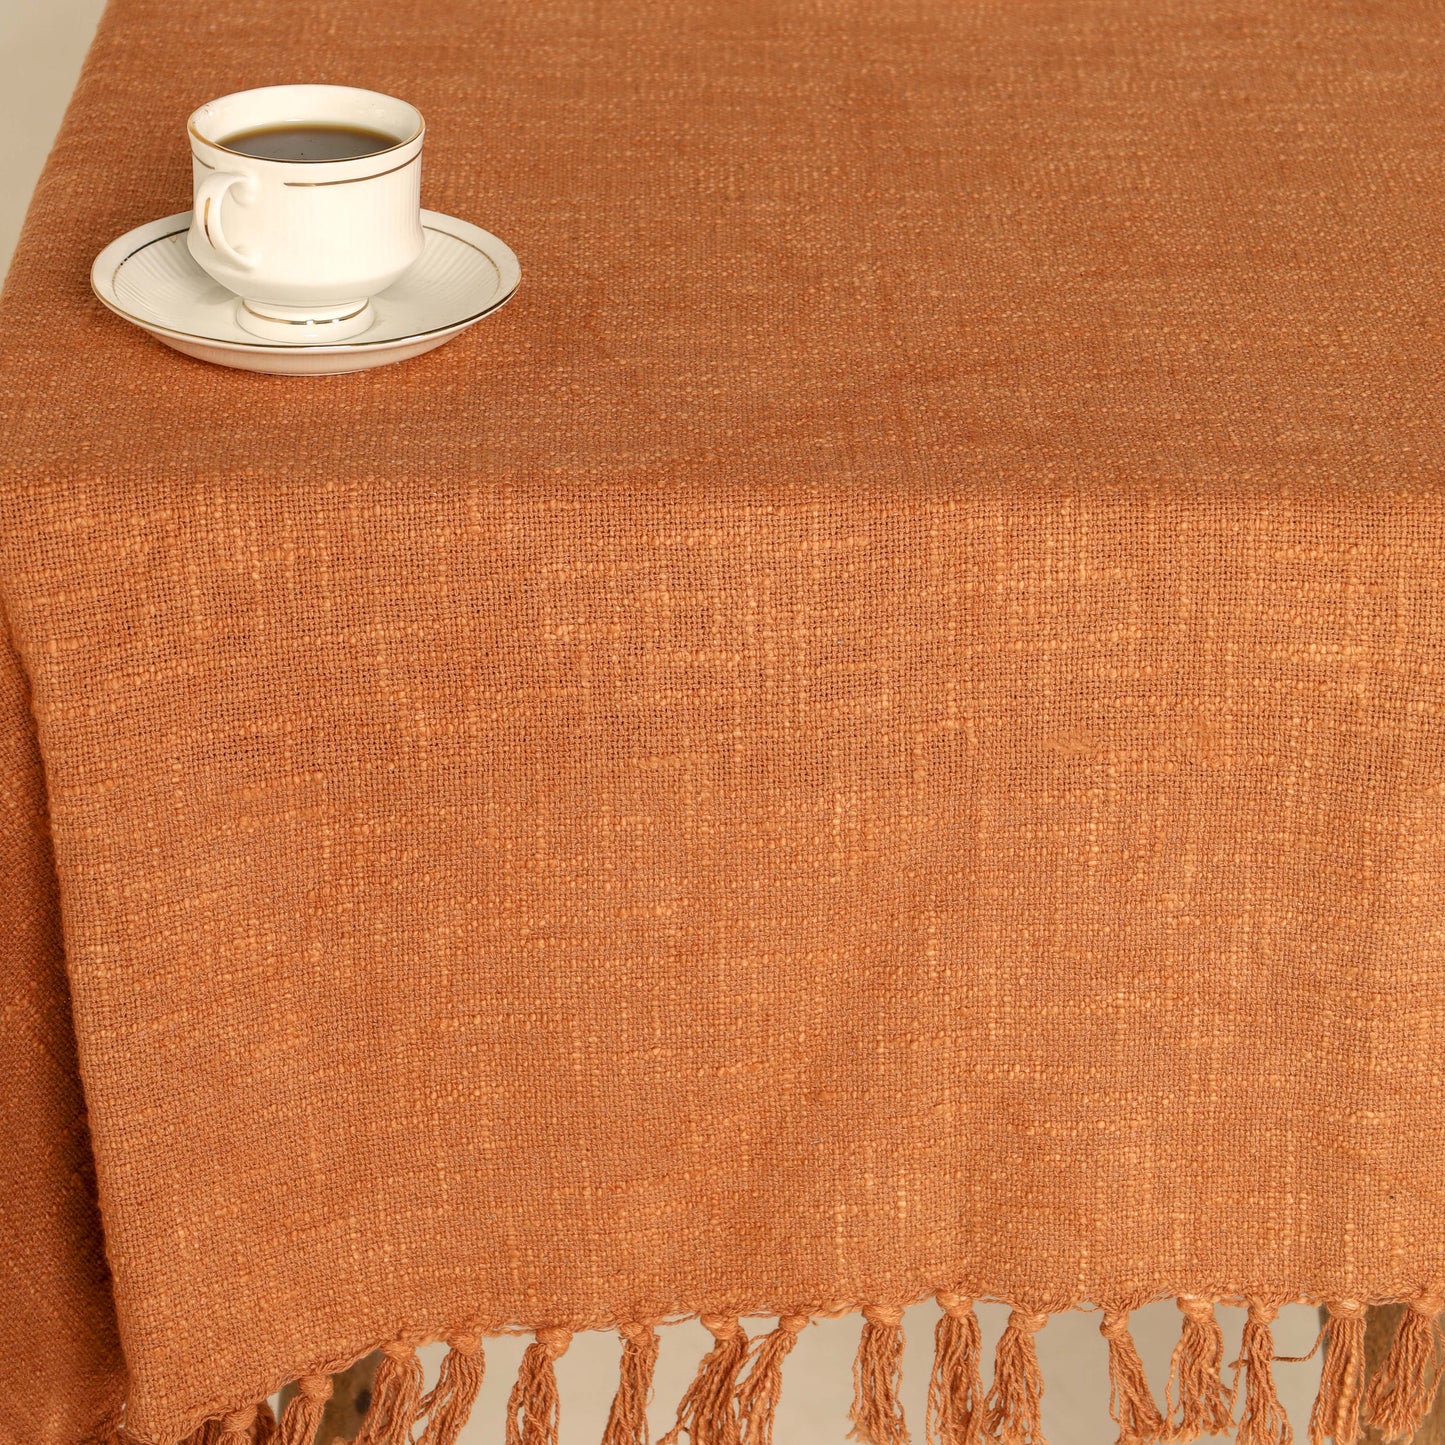 Rust Cotton Tablecloth